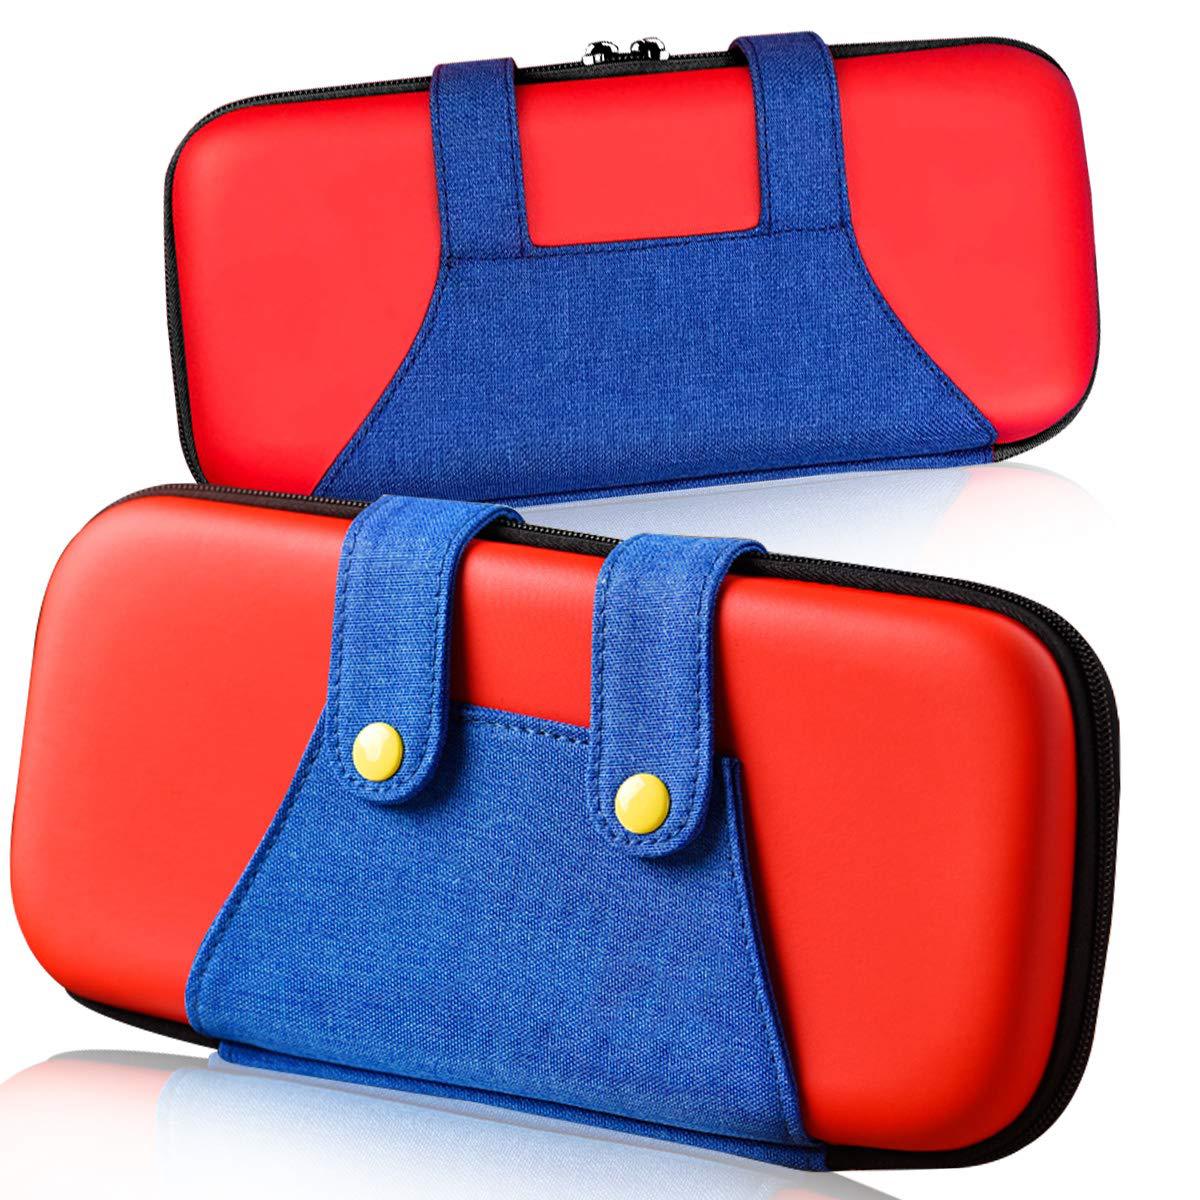 Mini Wear-resistant Portable Storage Bag Carrying Case for Switch Game Console red ZopiStyle